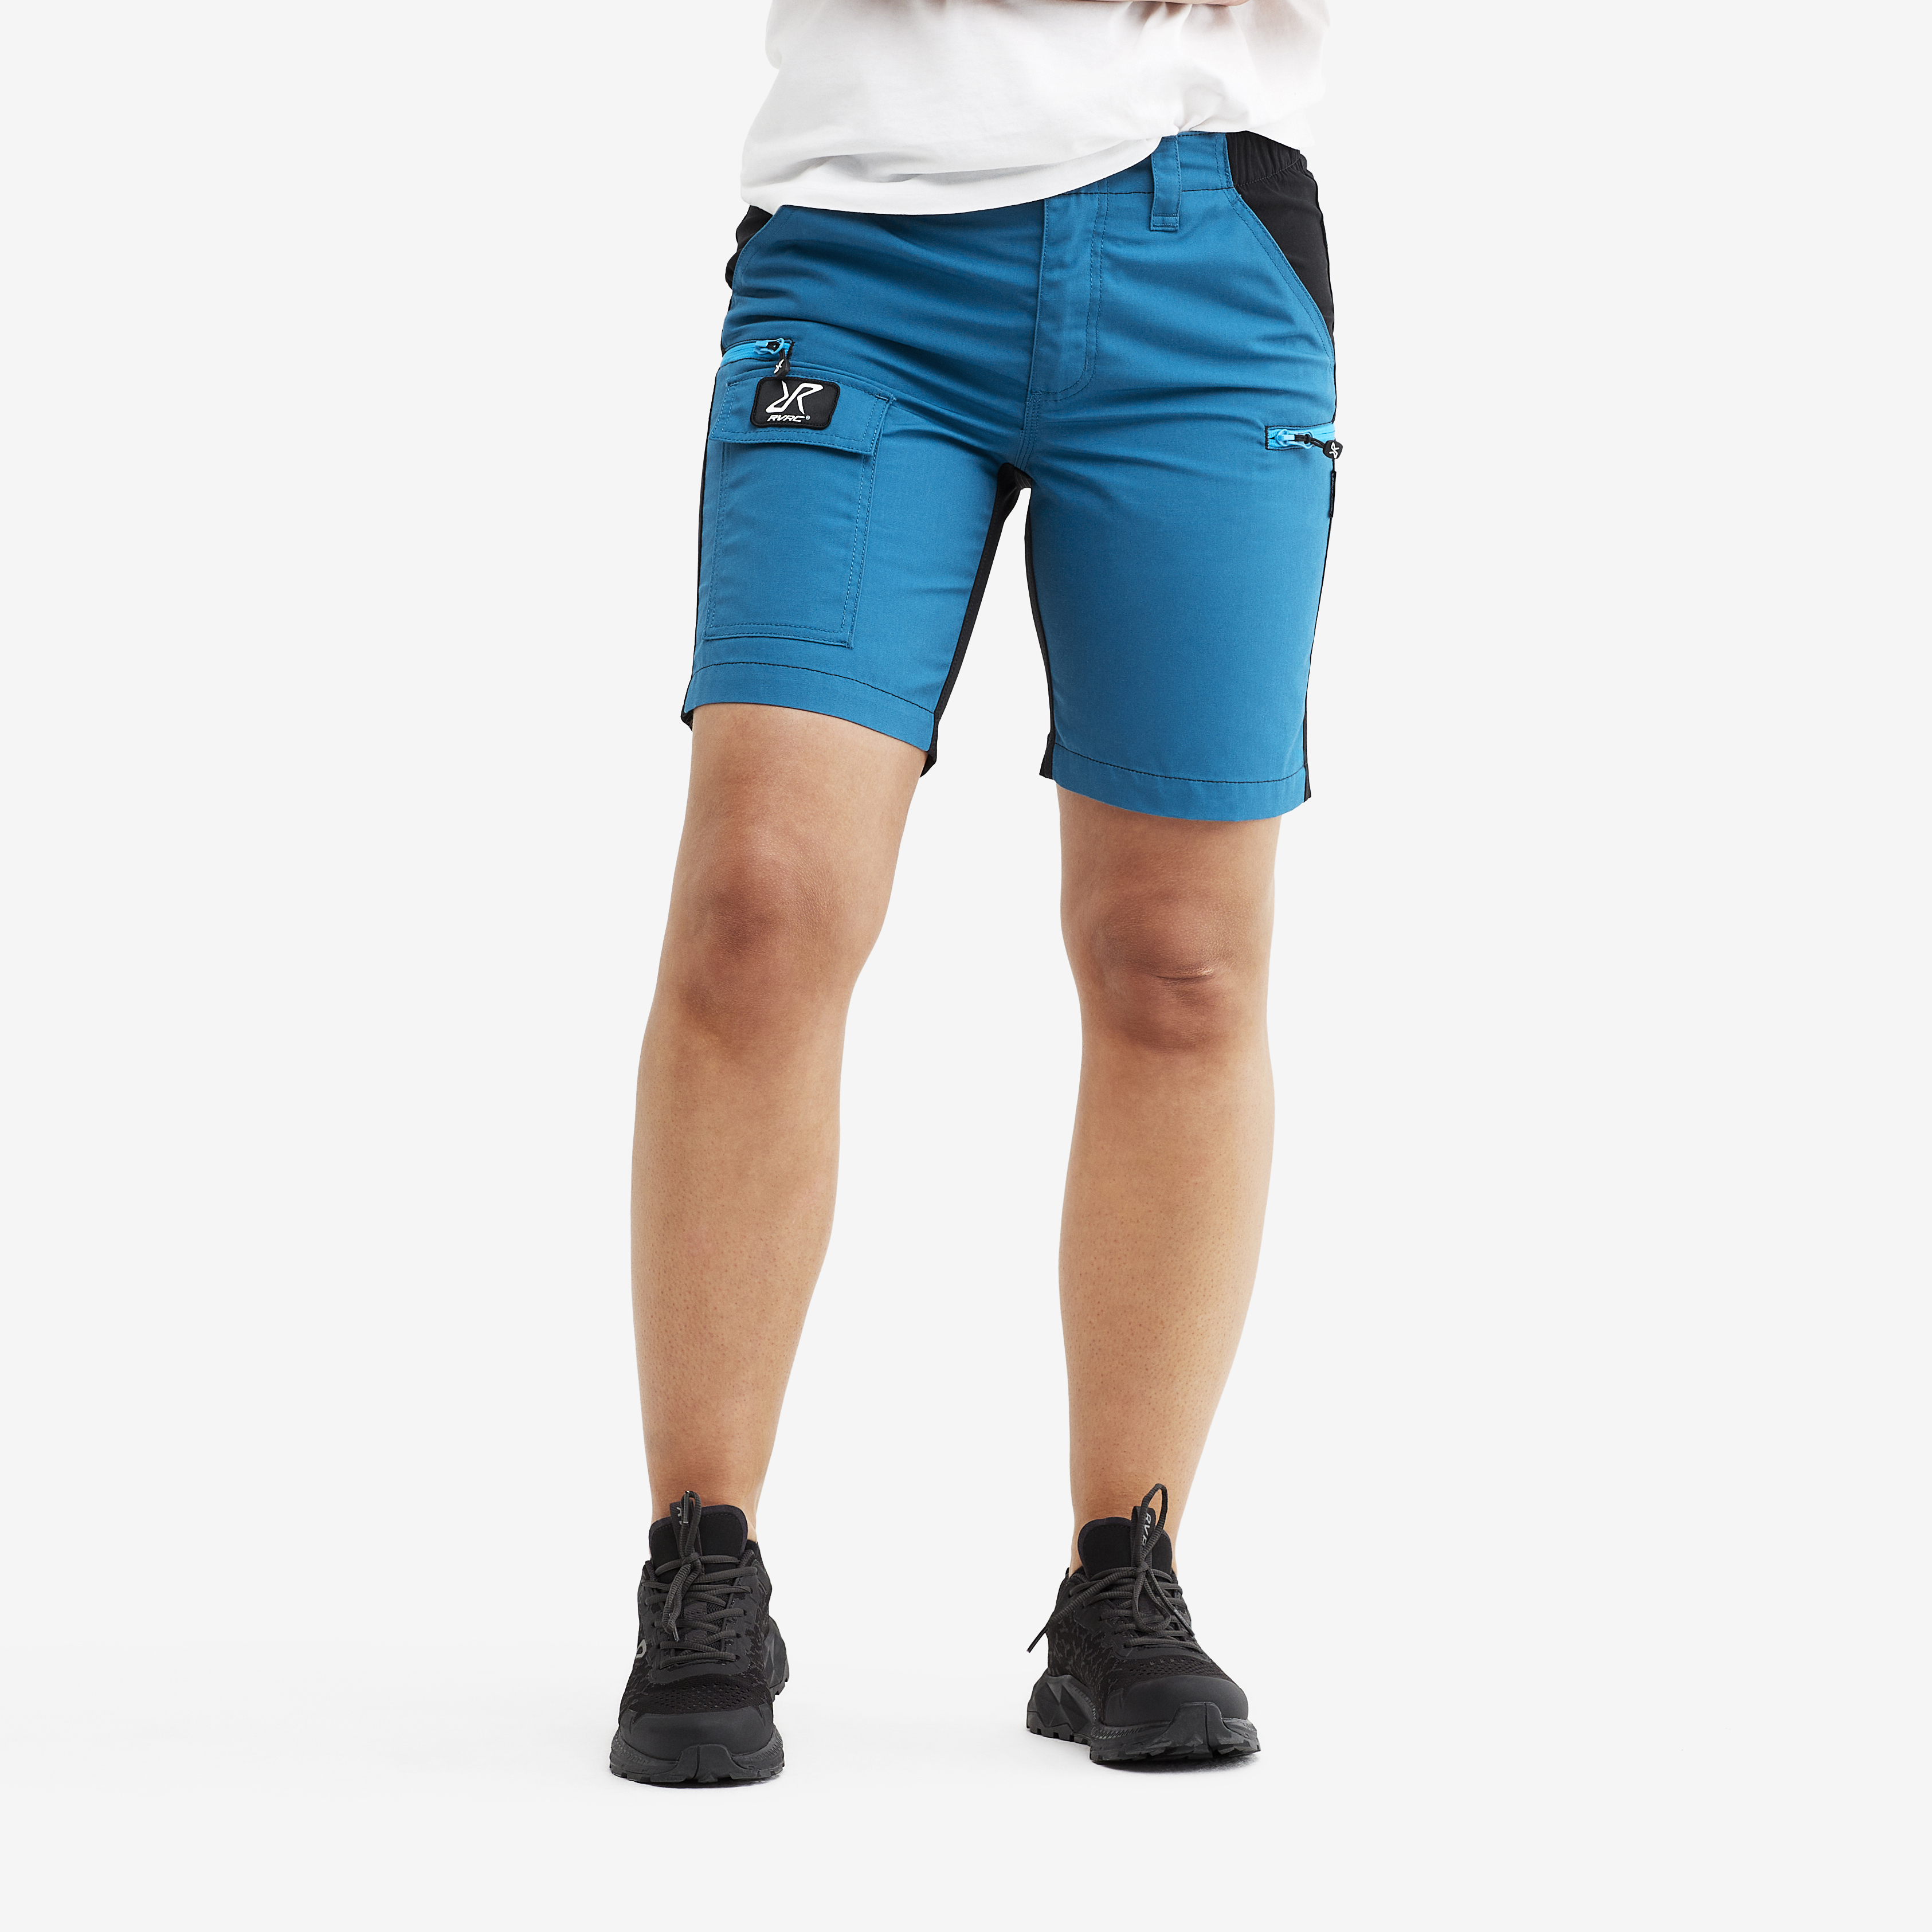 Nordwand shorts for women in blue